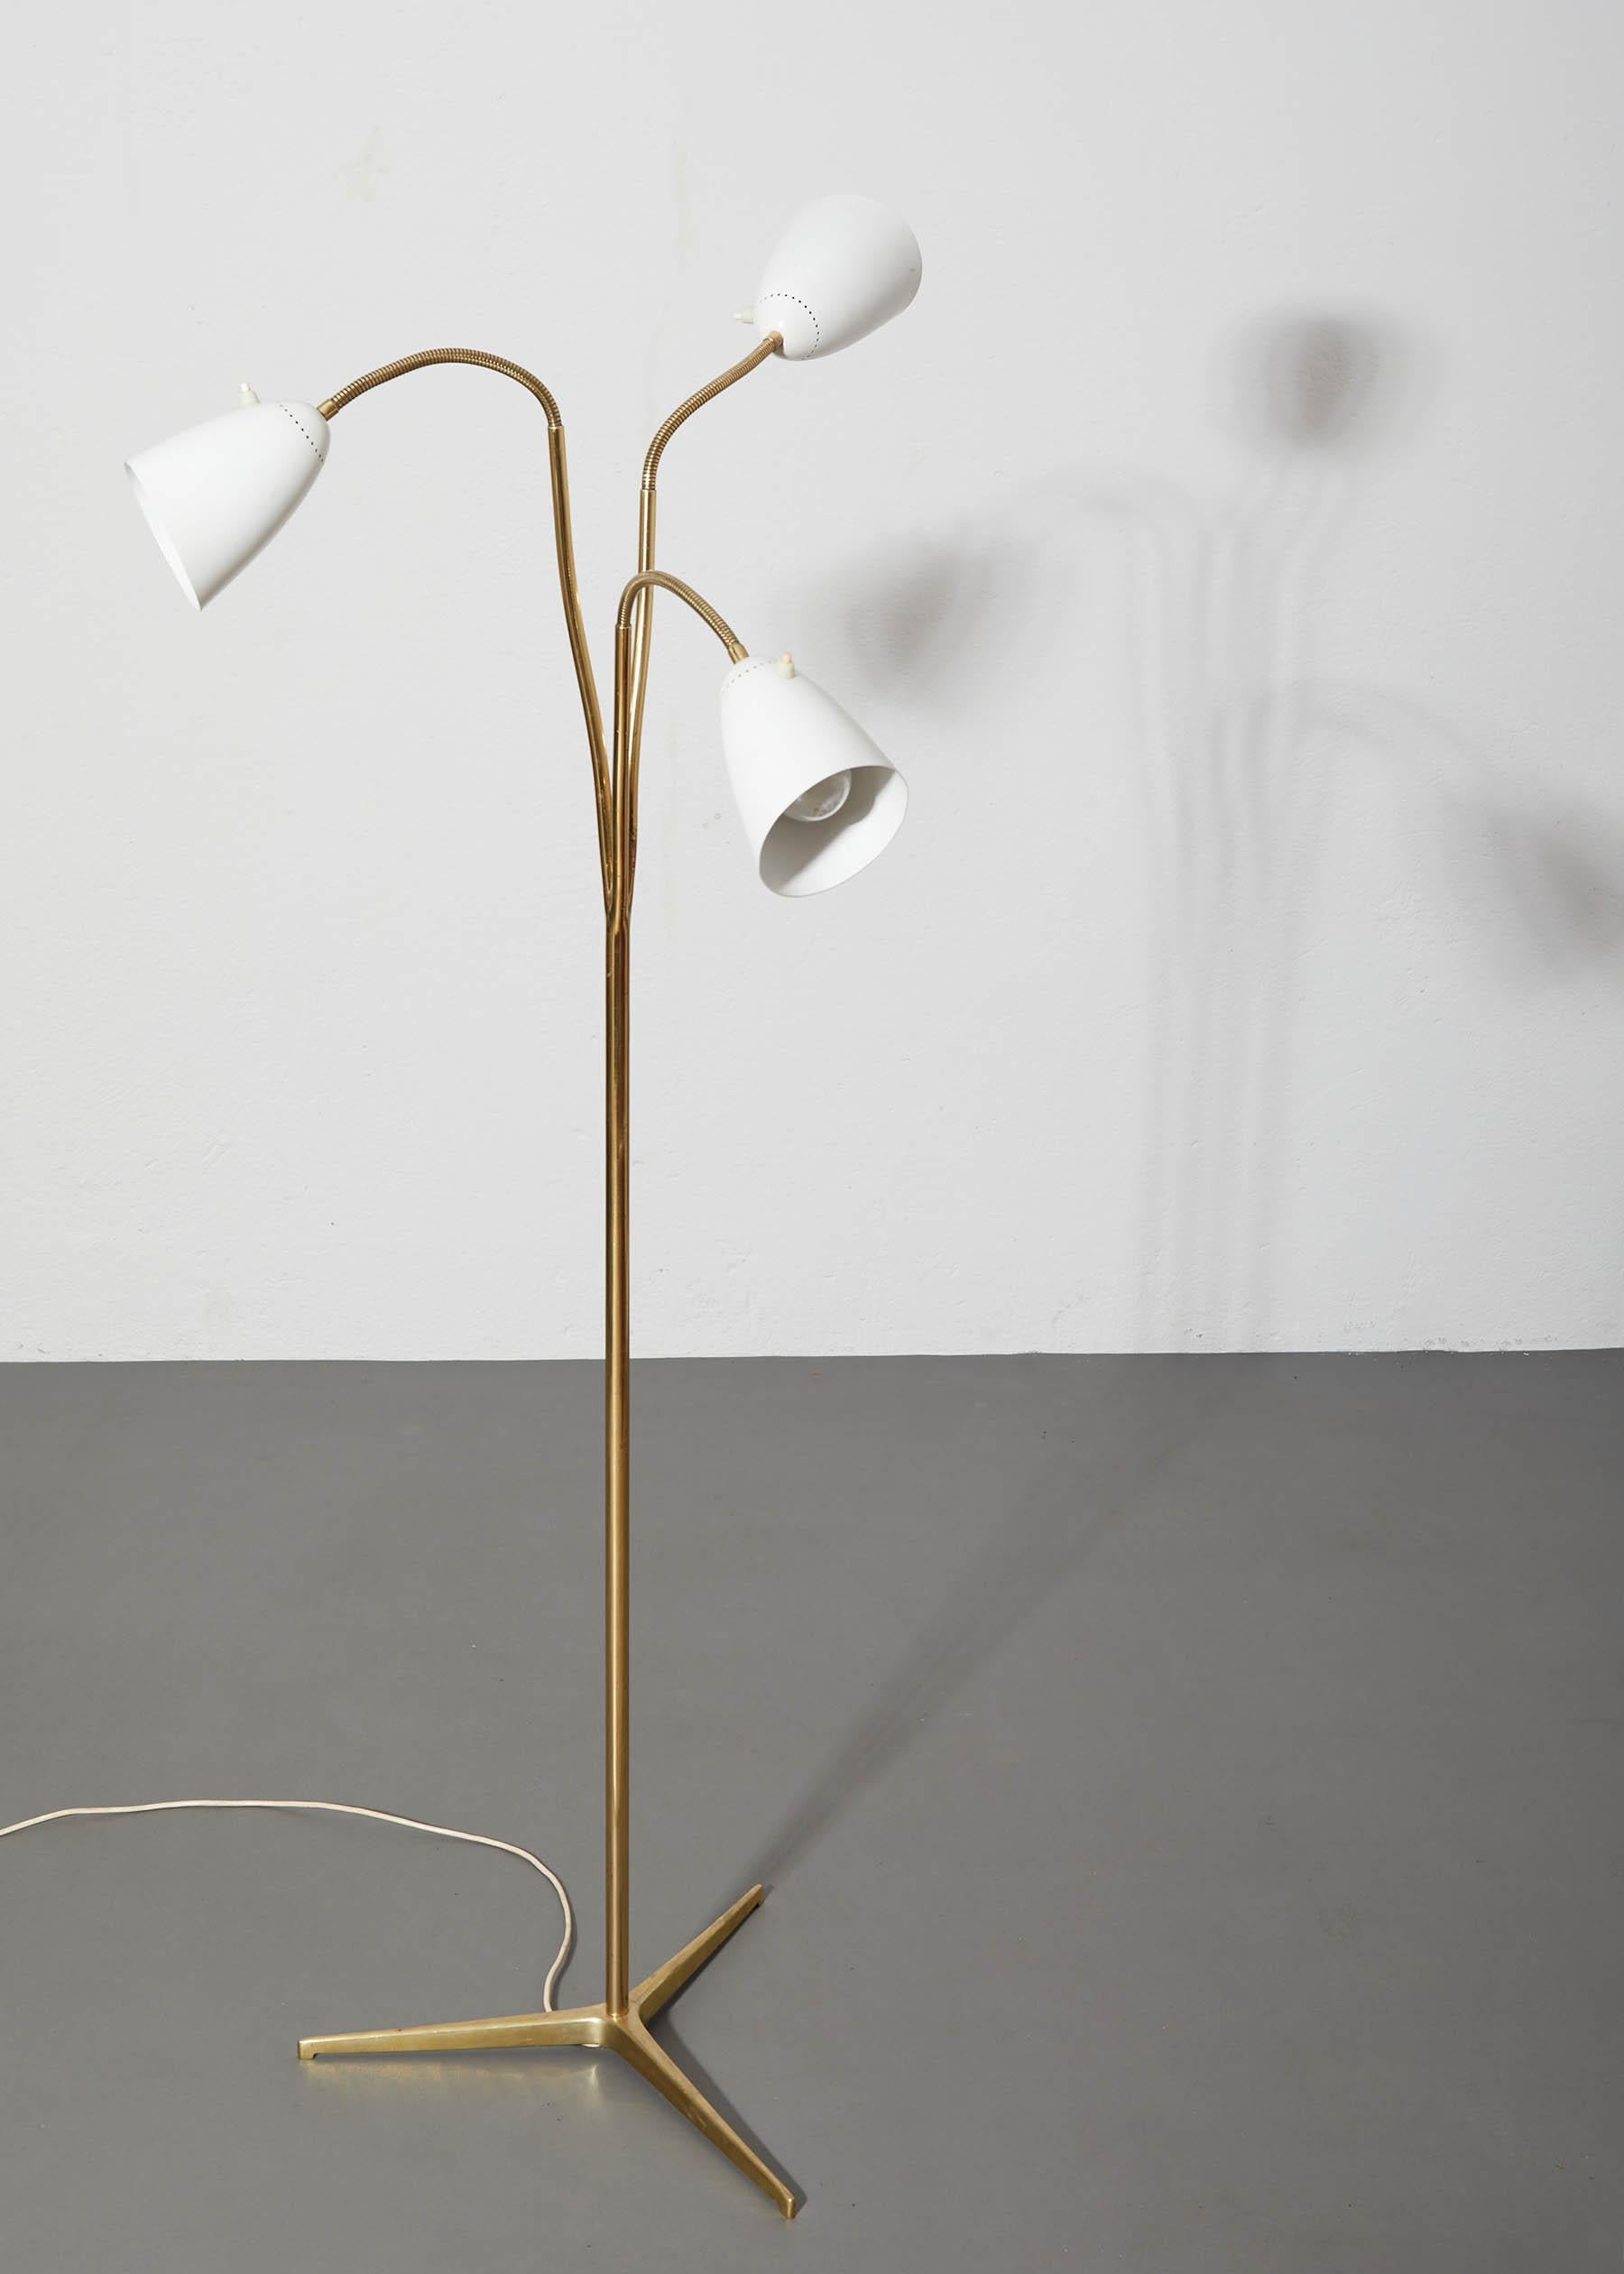 Beautiful floor lamp with three flexible arms attributed to Italian lighting manufacturer Oluce around 1950.

High-quality execution of the brass stem which branches out like delicate filigrane branches of a tree.

The lamp has three light